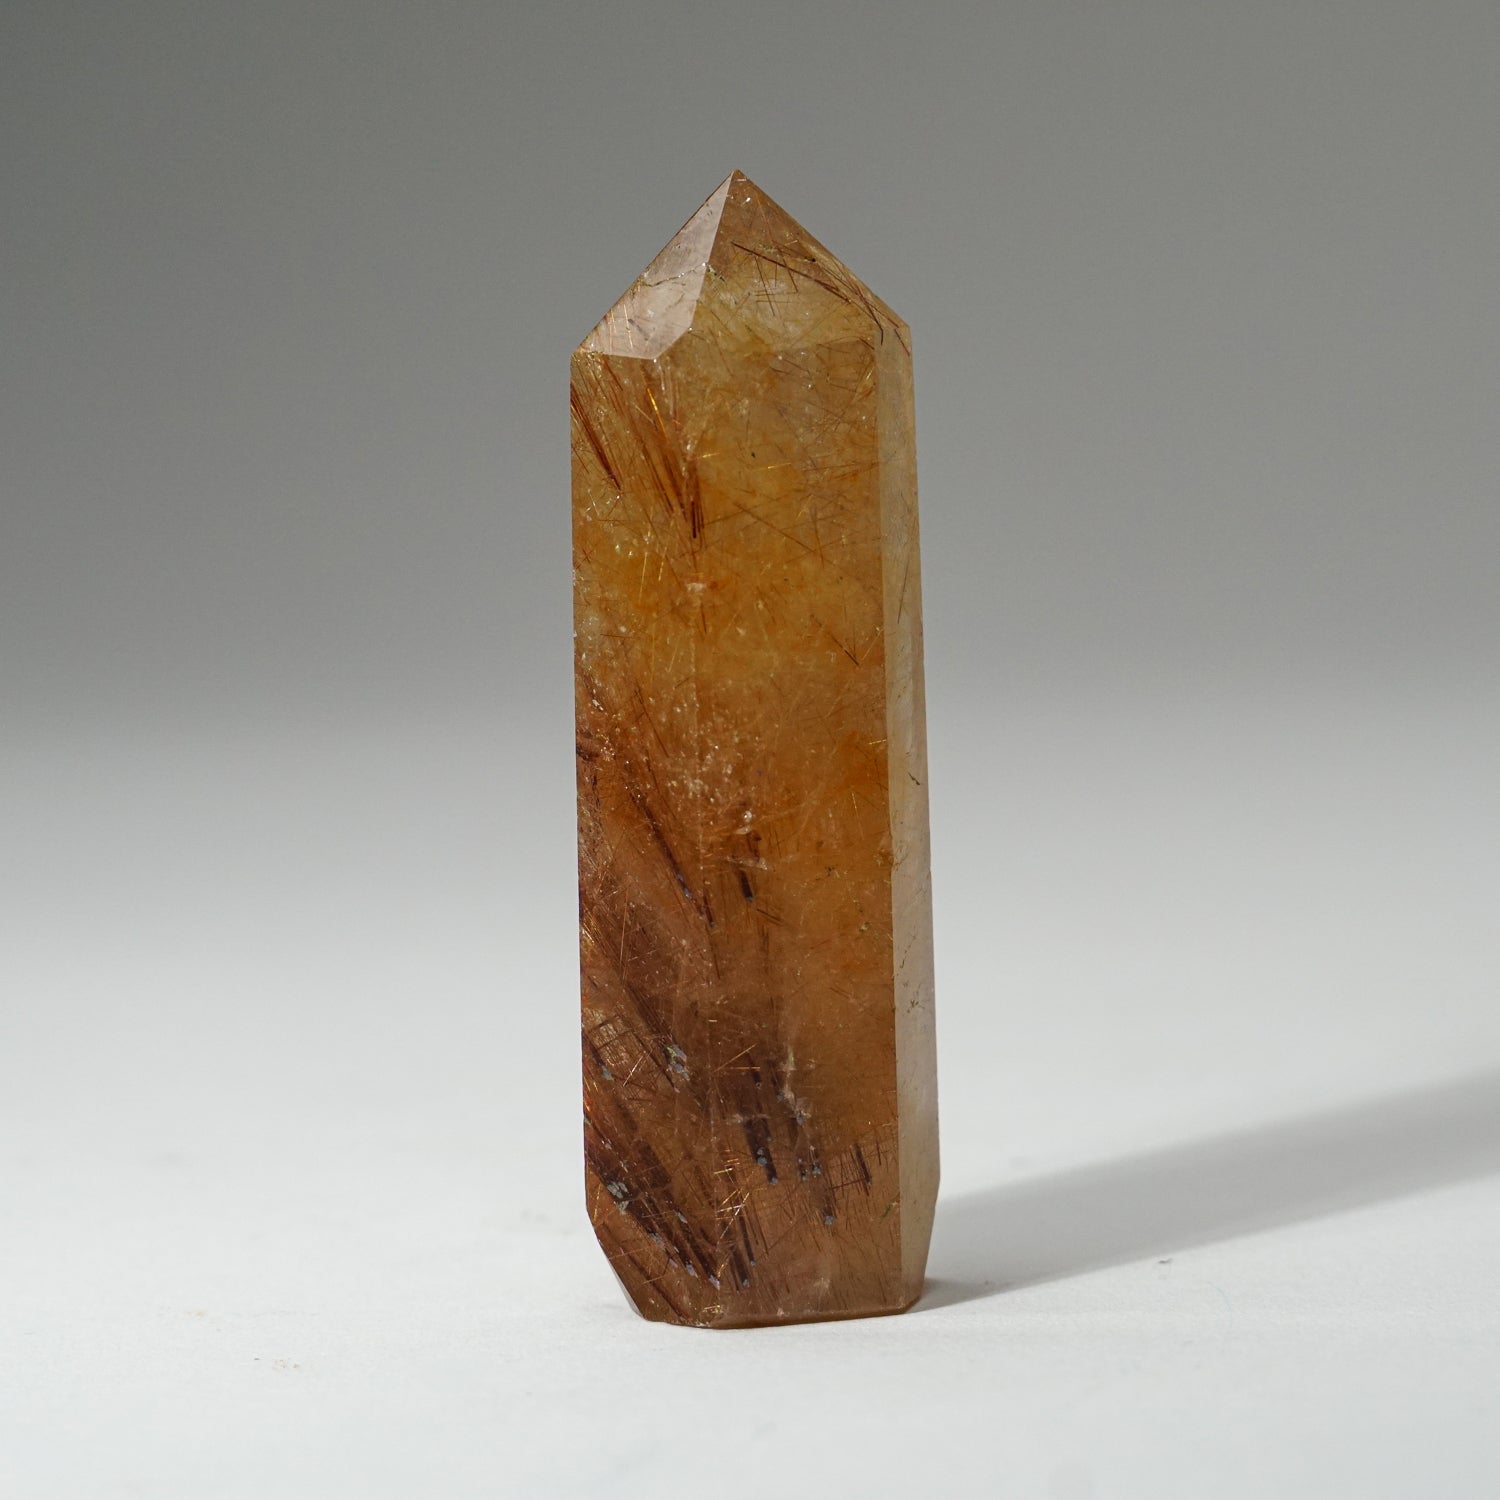 Genuine Polished Red Rutilated Quartz Point from Brazil (71.3 grams)